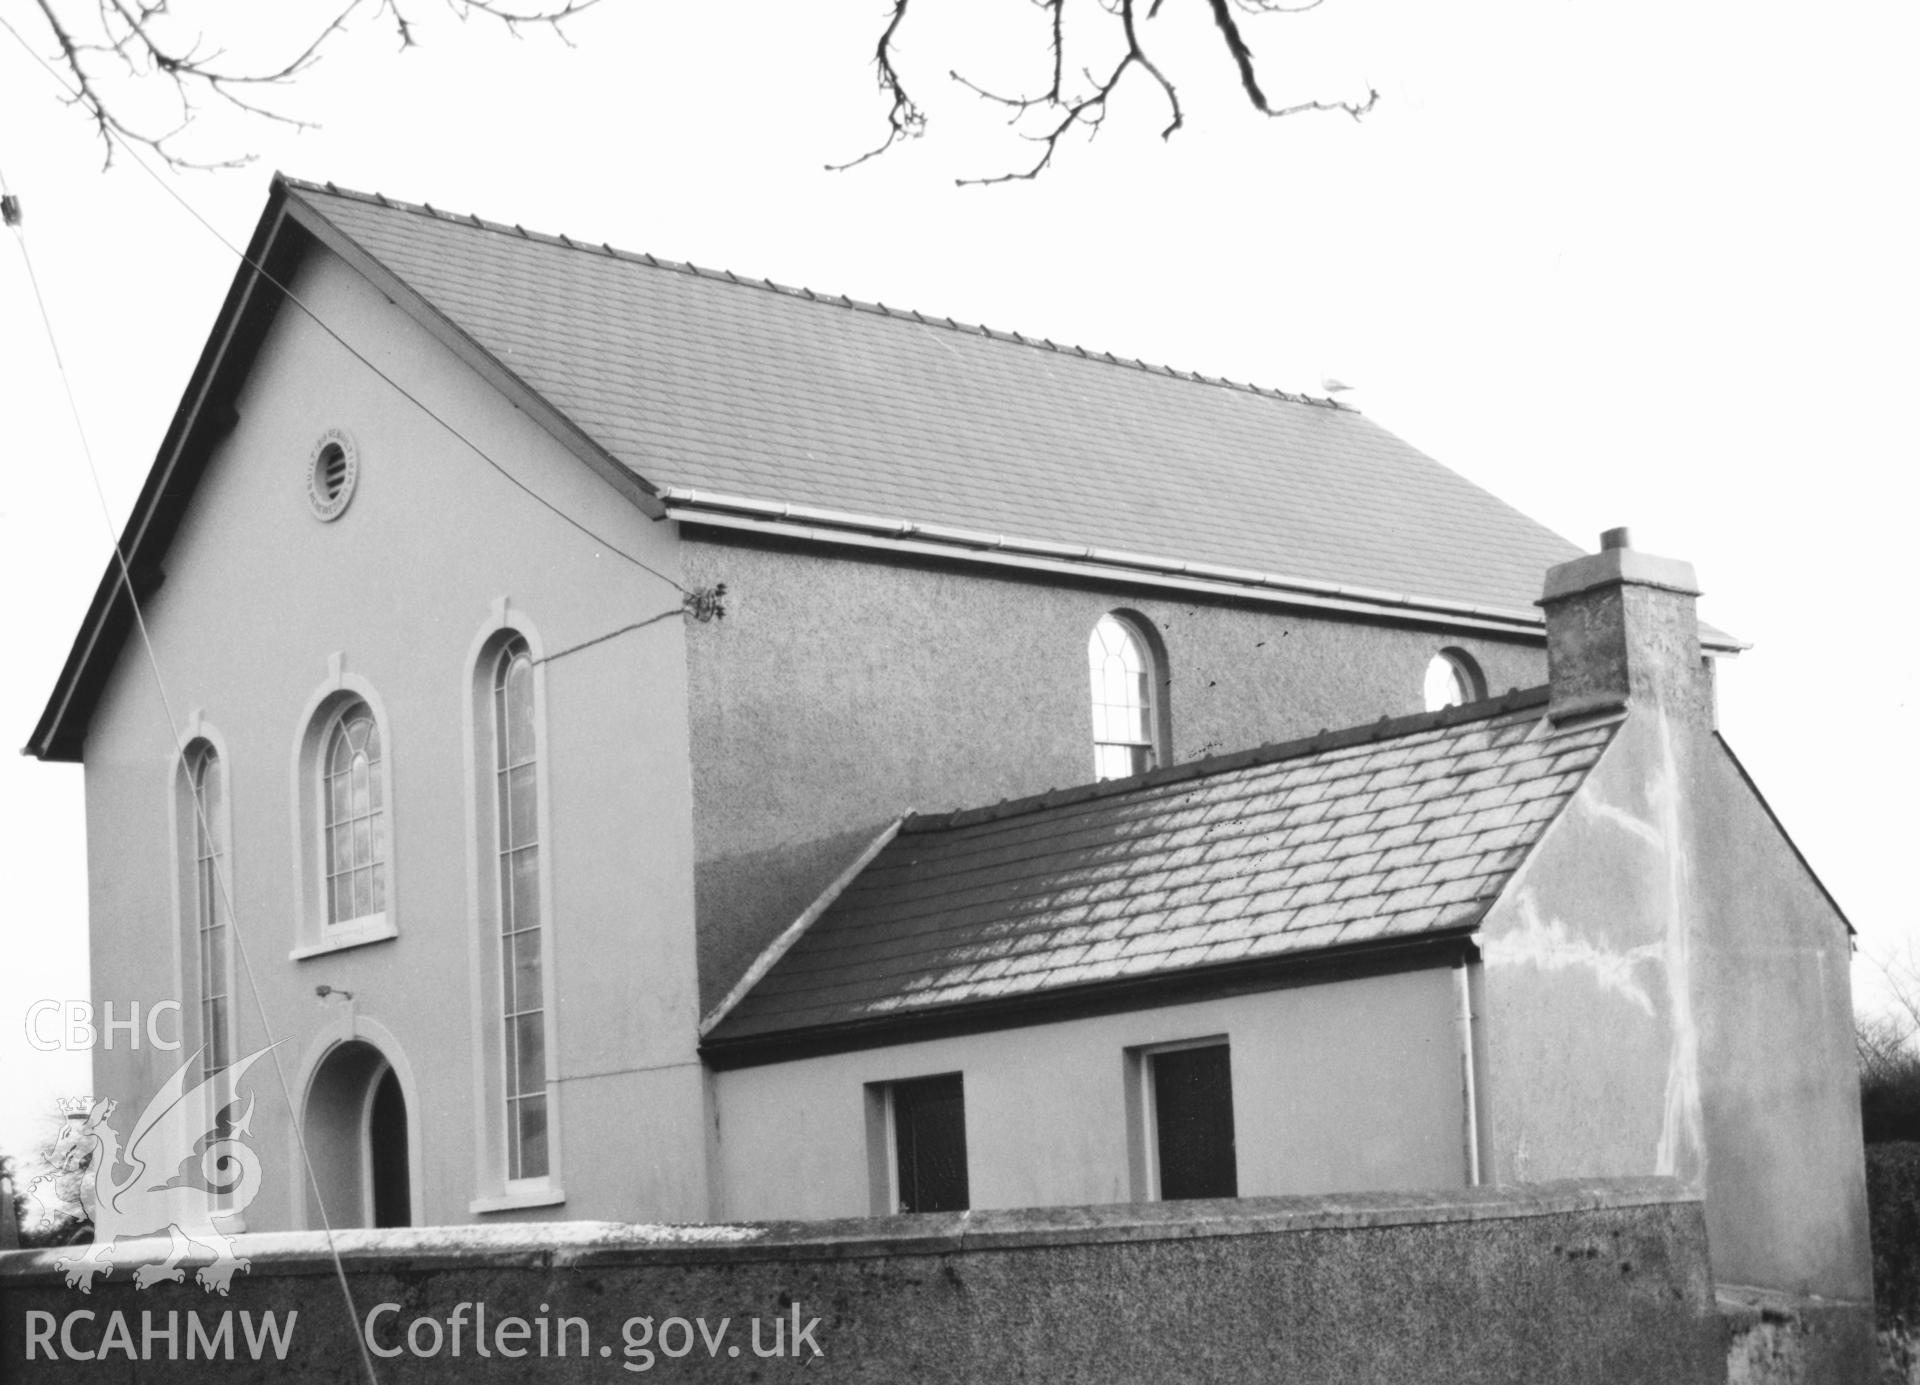 Digital copy of a black and white photograph showing exterior view of Templeton Congregational Chapel, taken by Robert Scourfield, 1996.